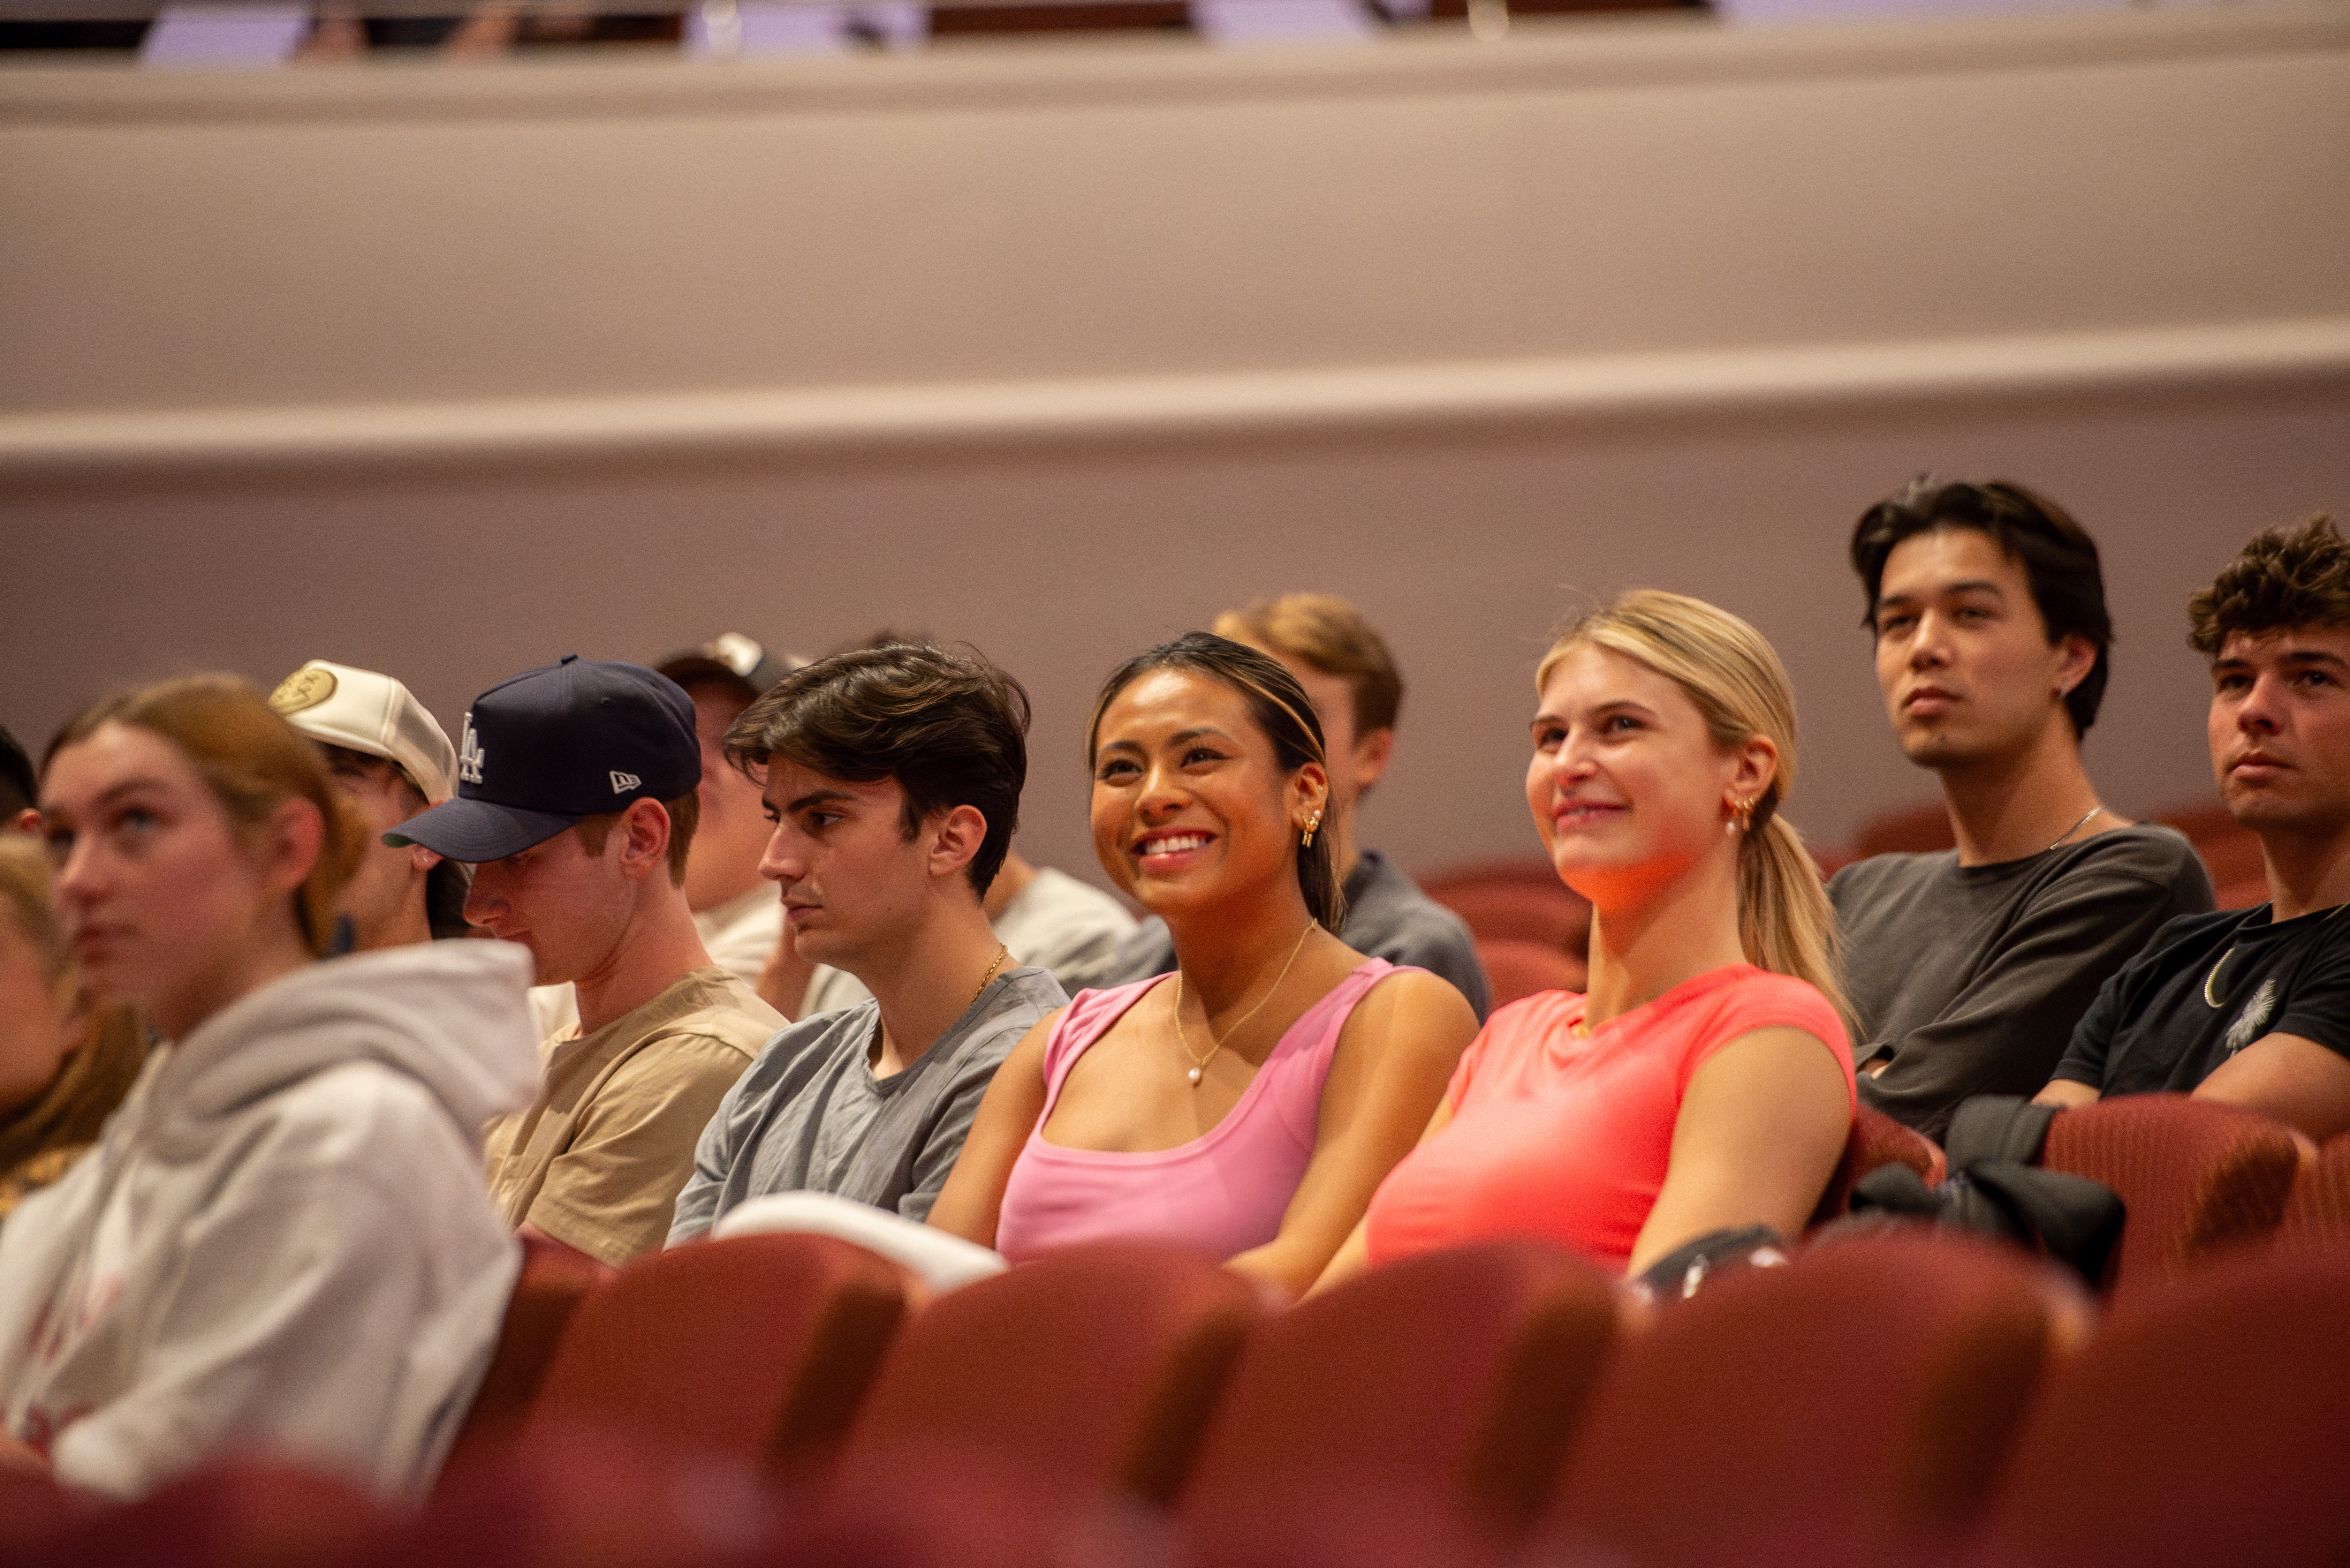 Students smile as they sit in an auditorium.